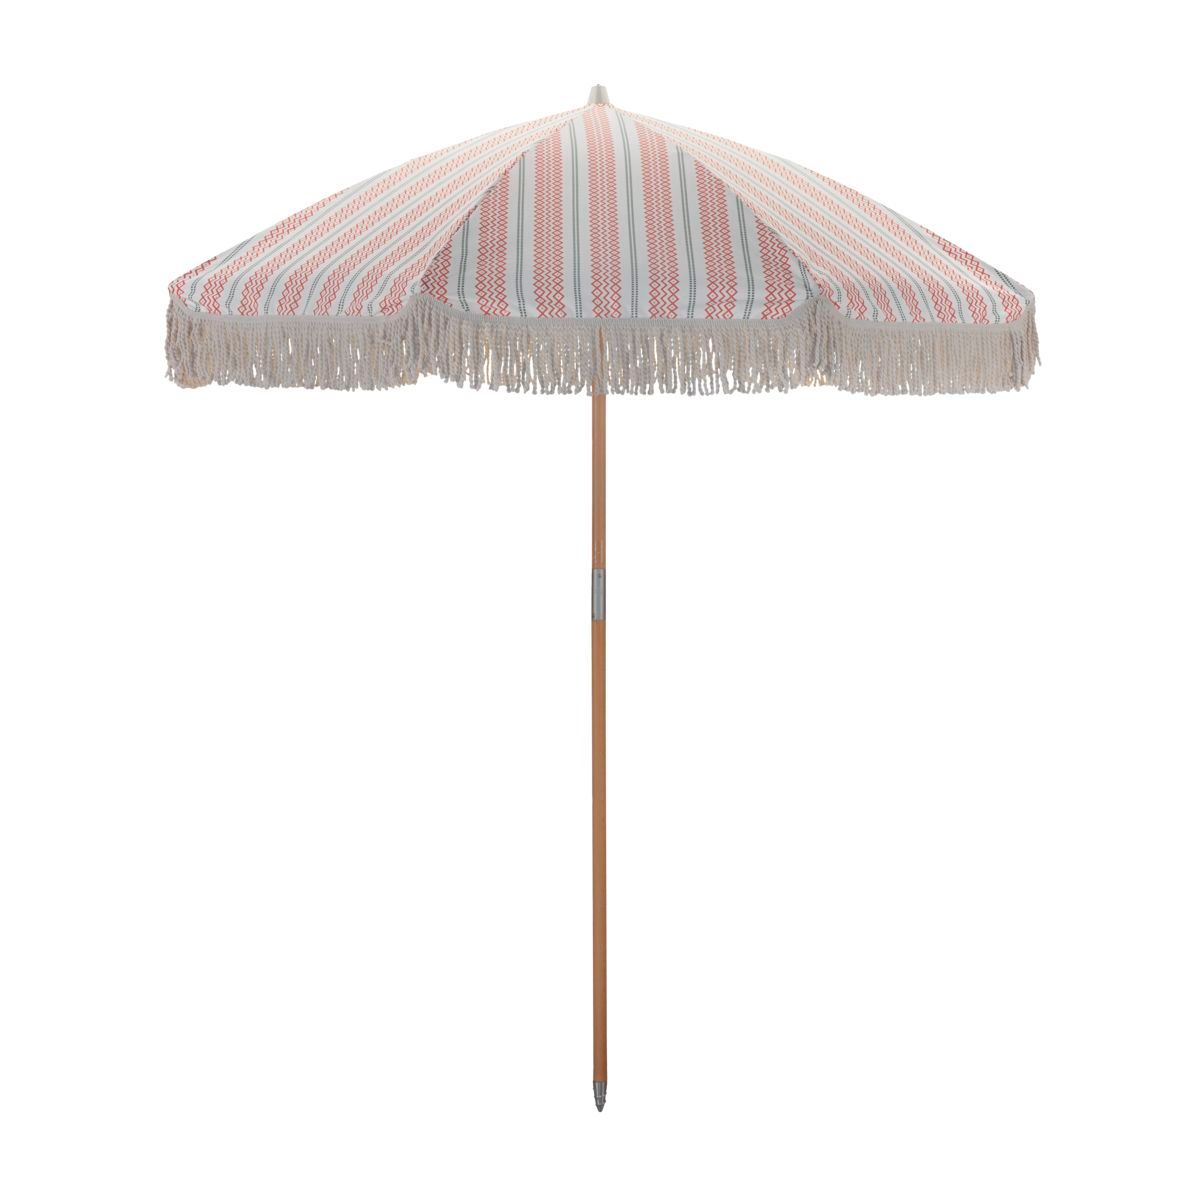 House Doctor Have Parasol Umbra, Red/Green